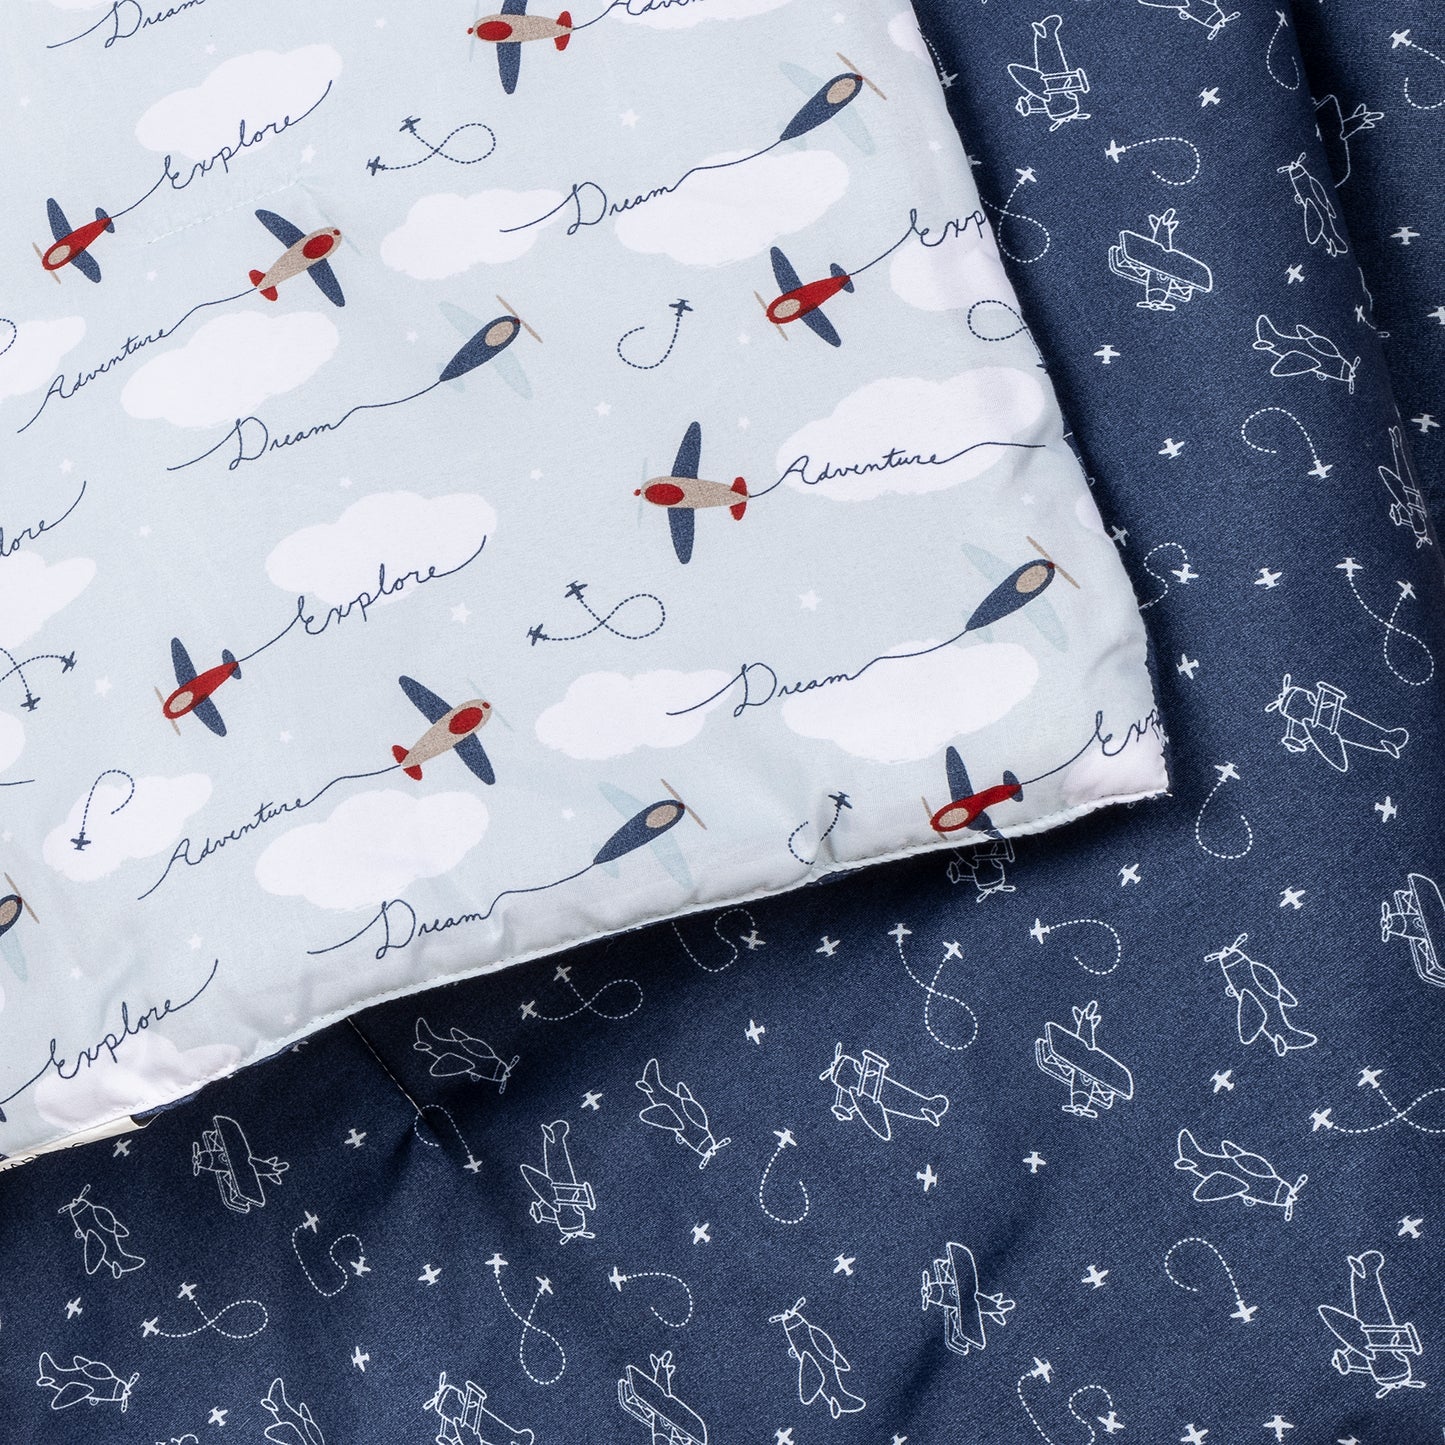 Air Travel 3 Piece Crib Bedding Set by Sammy & Lou®- stylized image of crib quilt features navy and red airplanes with clouds and a blue background. Reverse side of quilt features a navy background with celestial stars